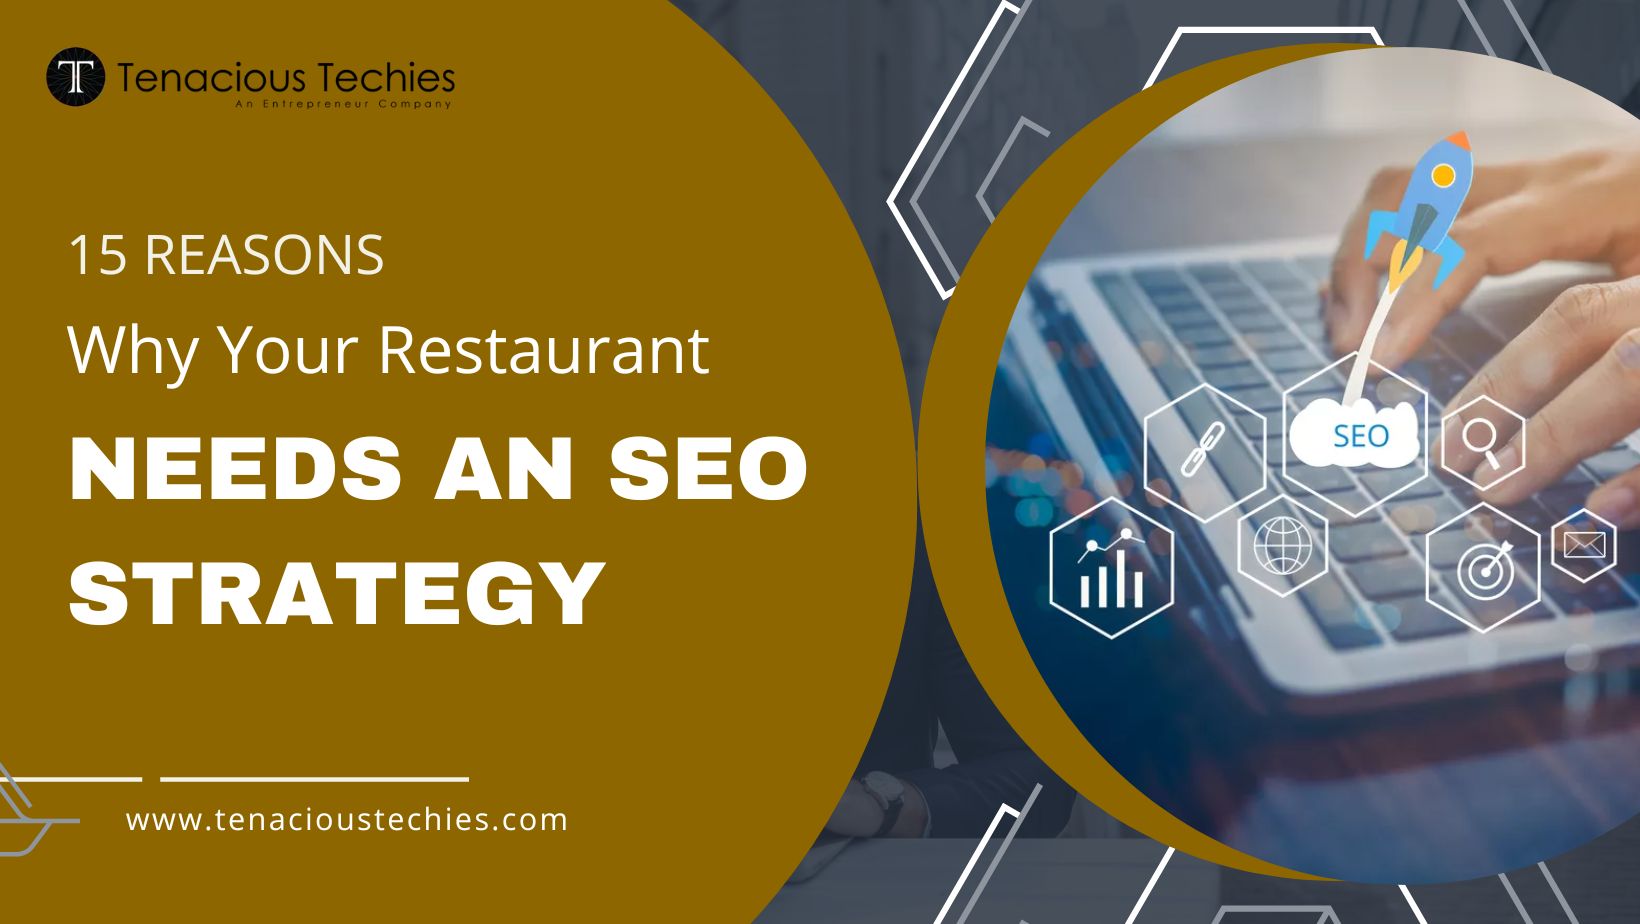 15-reasons-why-your-restaurant-needs-an-seo-strategy